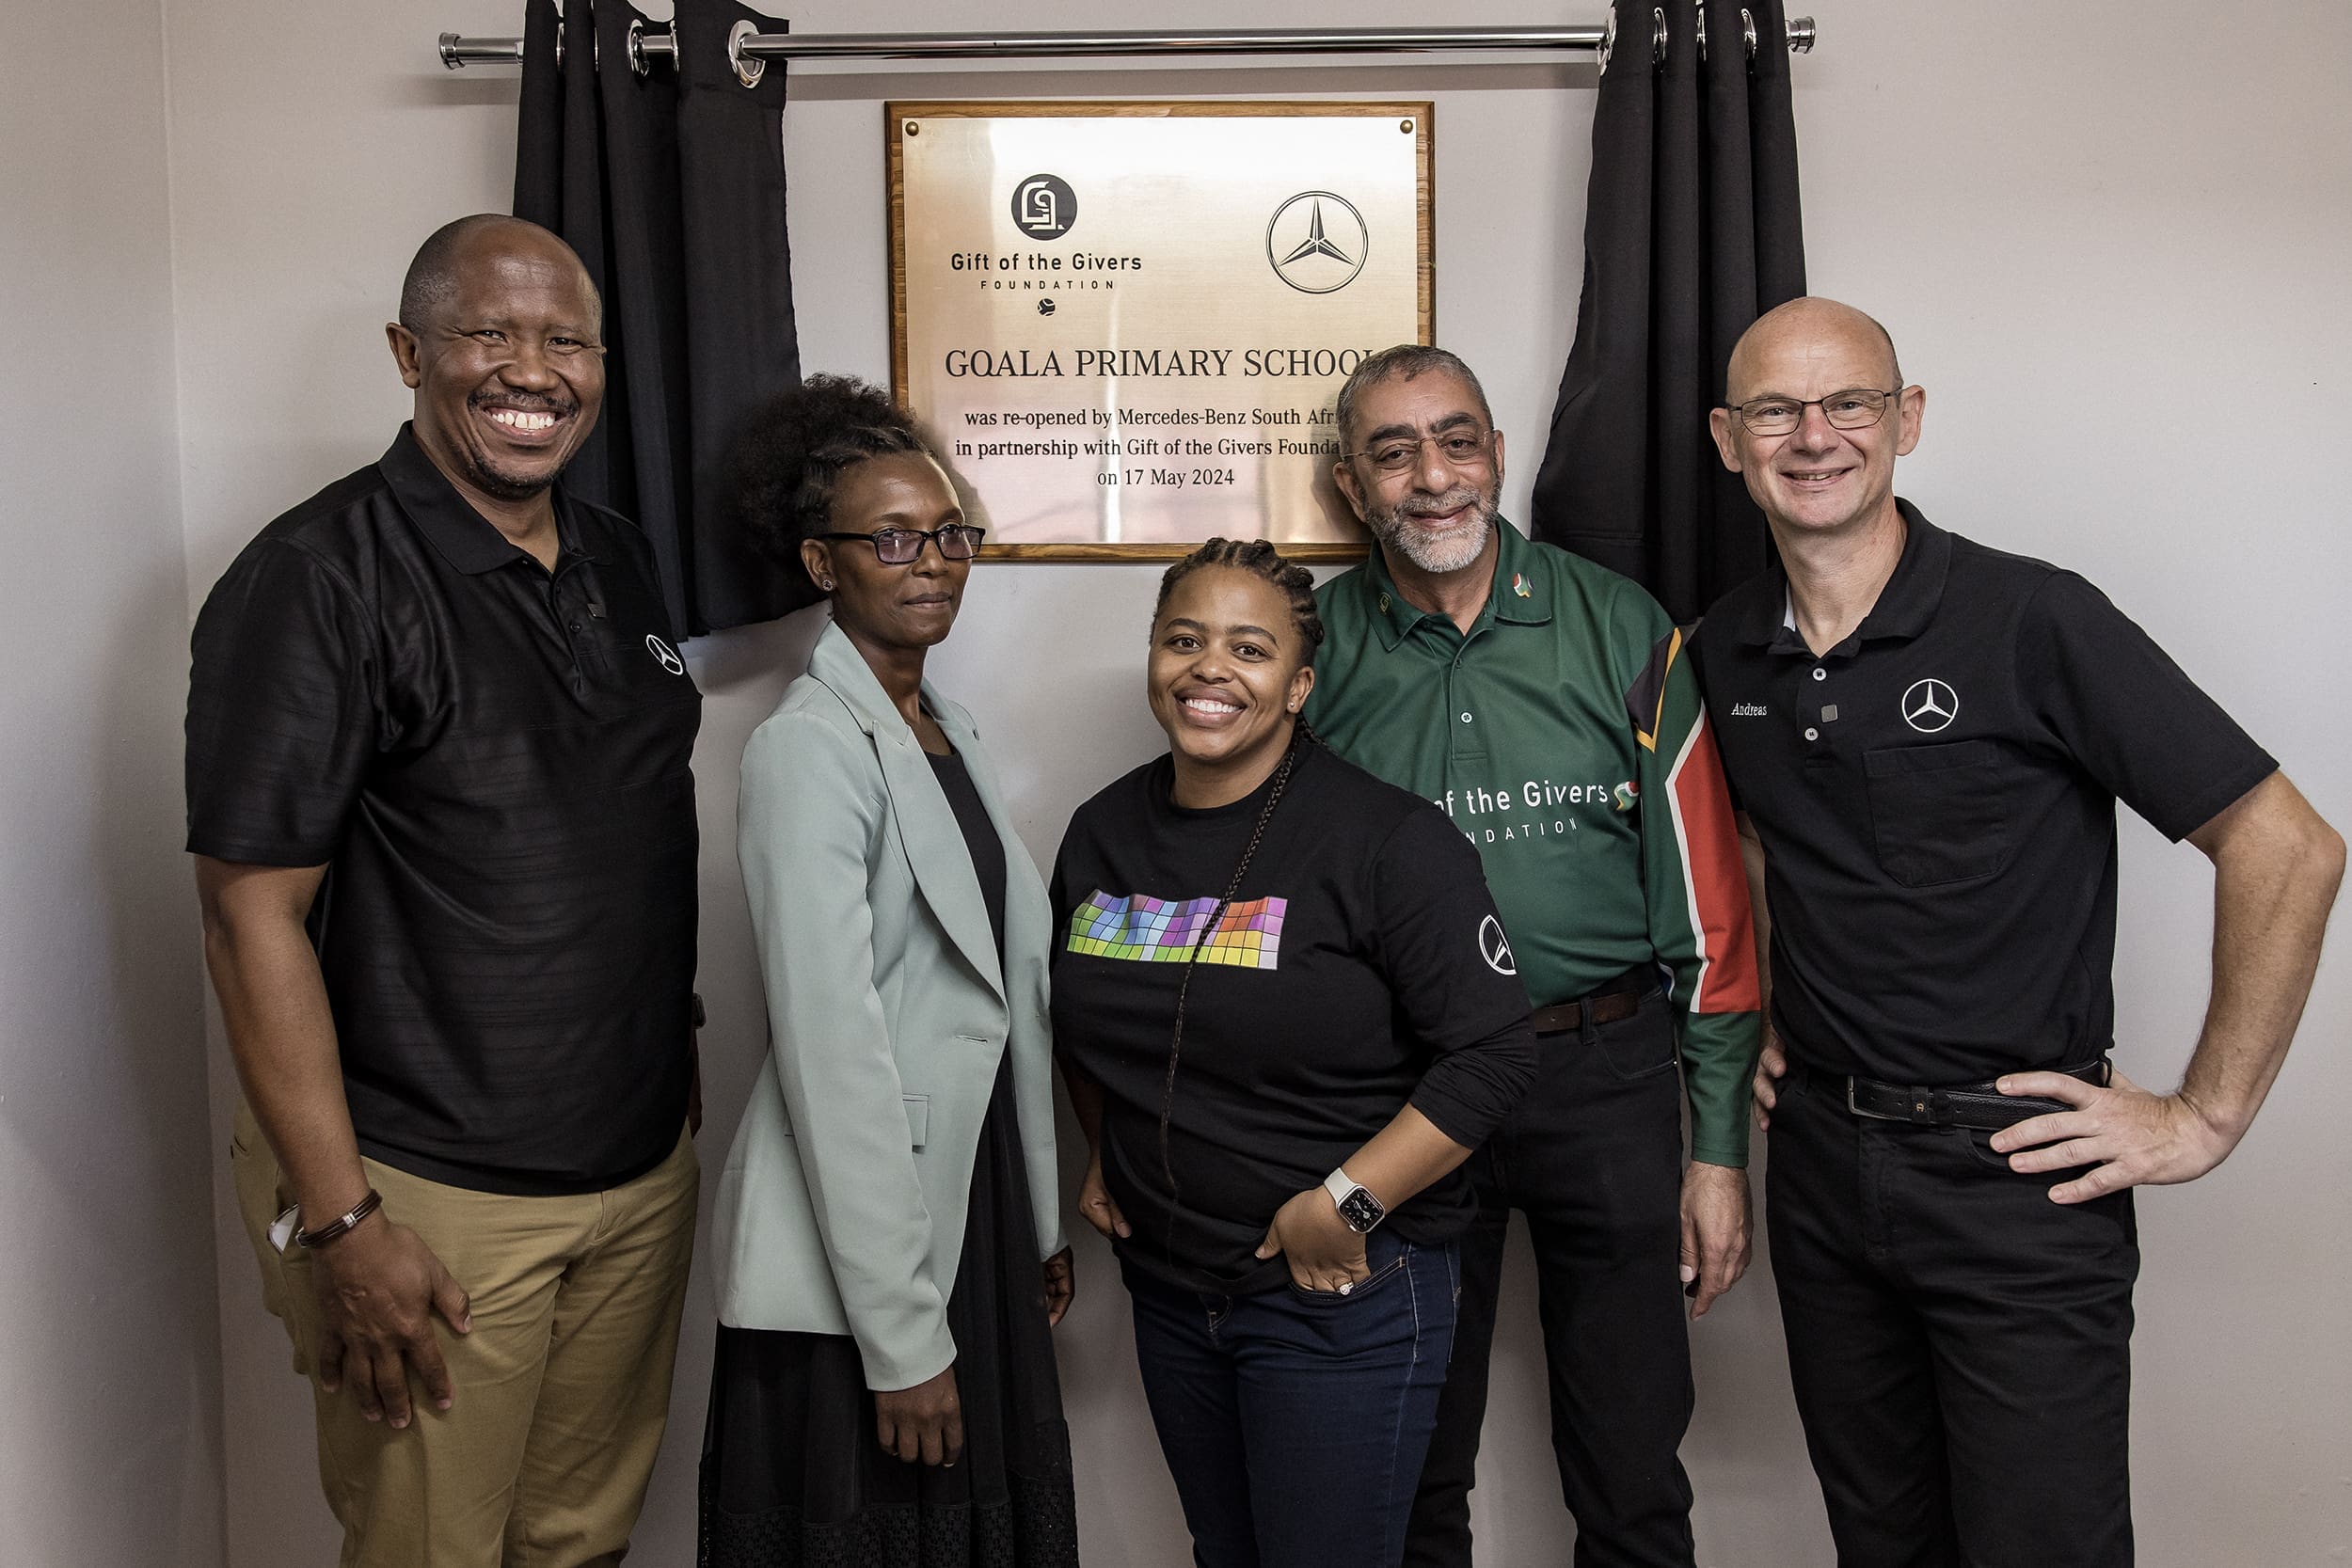 Mercedes-Benz South Africa and the Gift of the Givers Foundation team up to revamp Gqala Primary School in the Eastern Cape